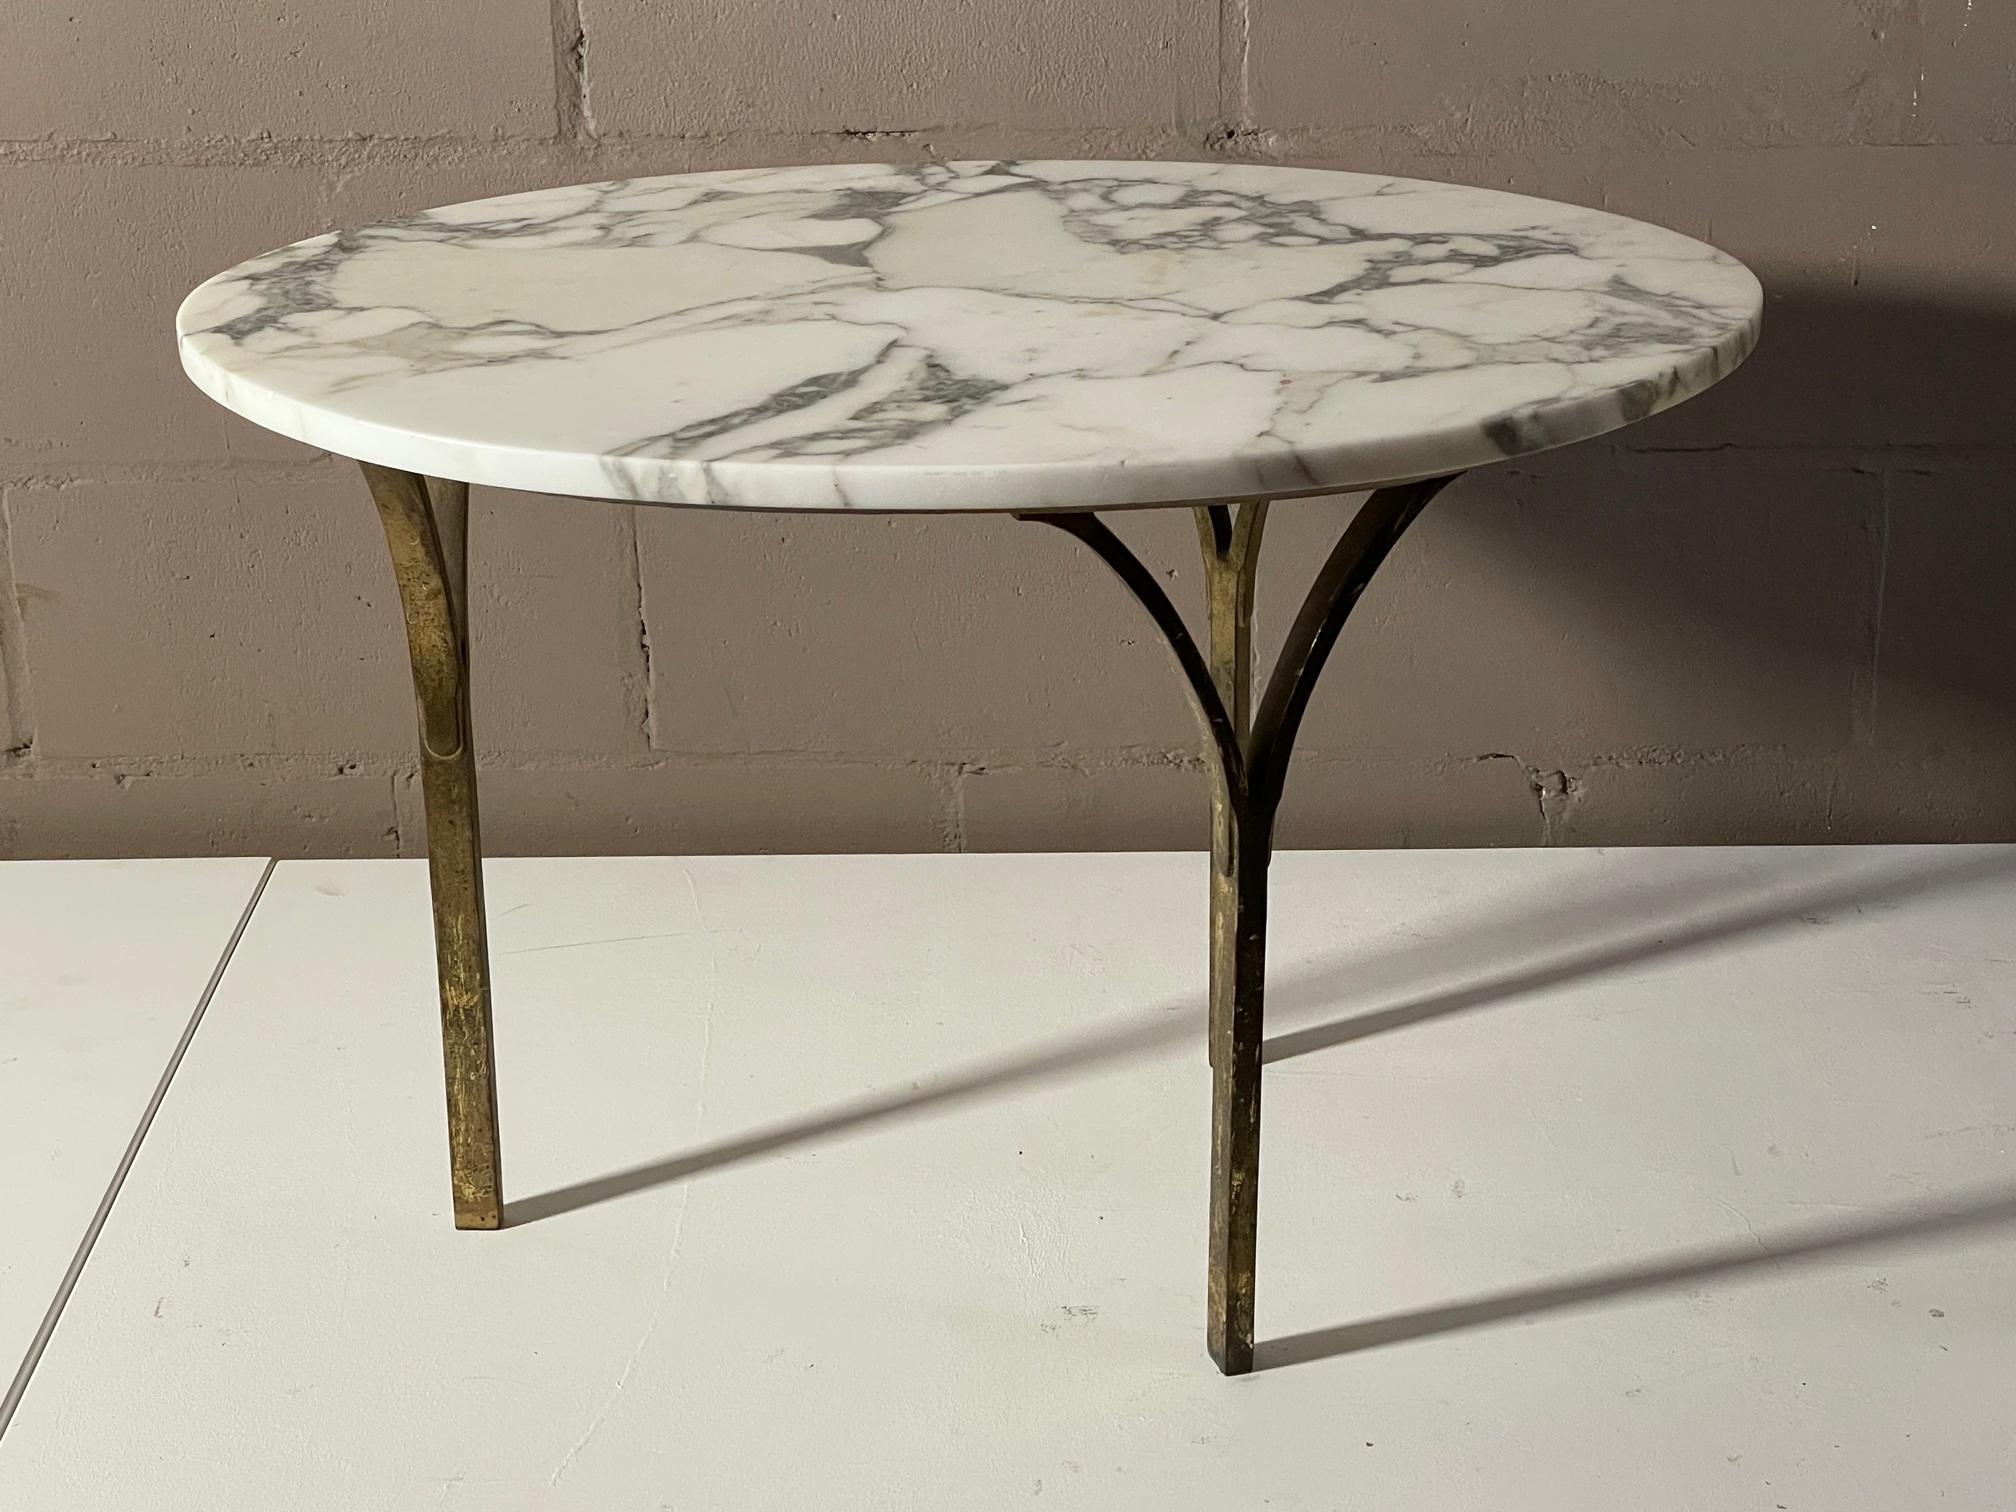 An unusual Italian side table with marble top and bronze Y shaped legs. The legs are solid bronze-heavy and have a nice patina.